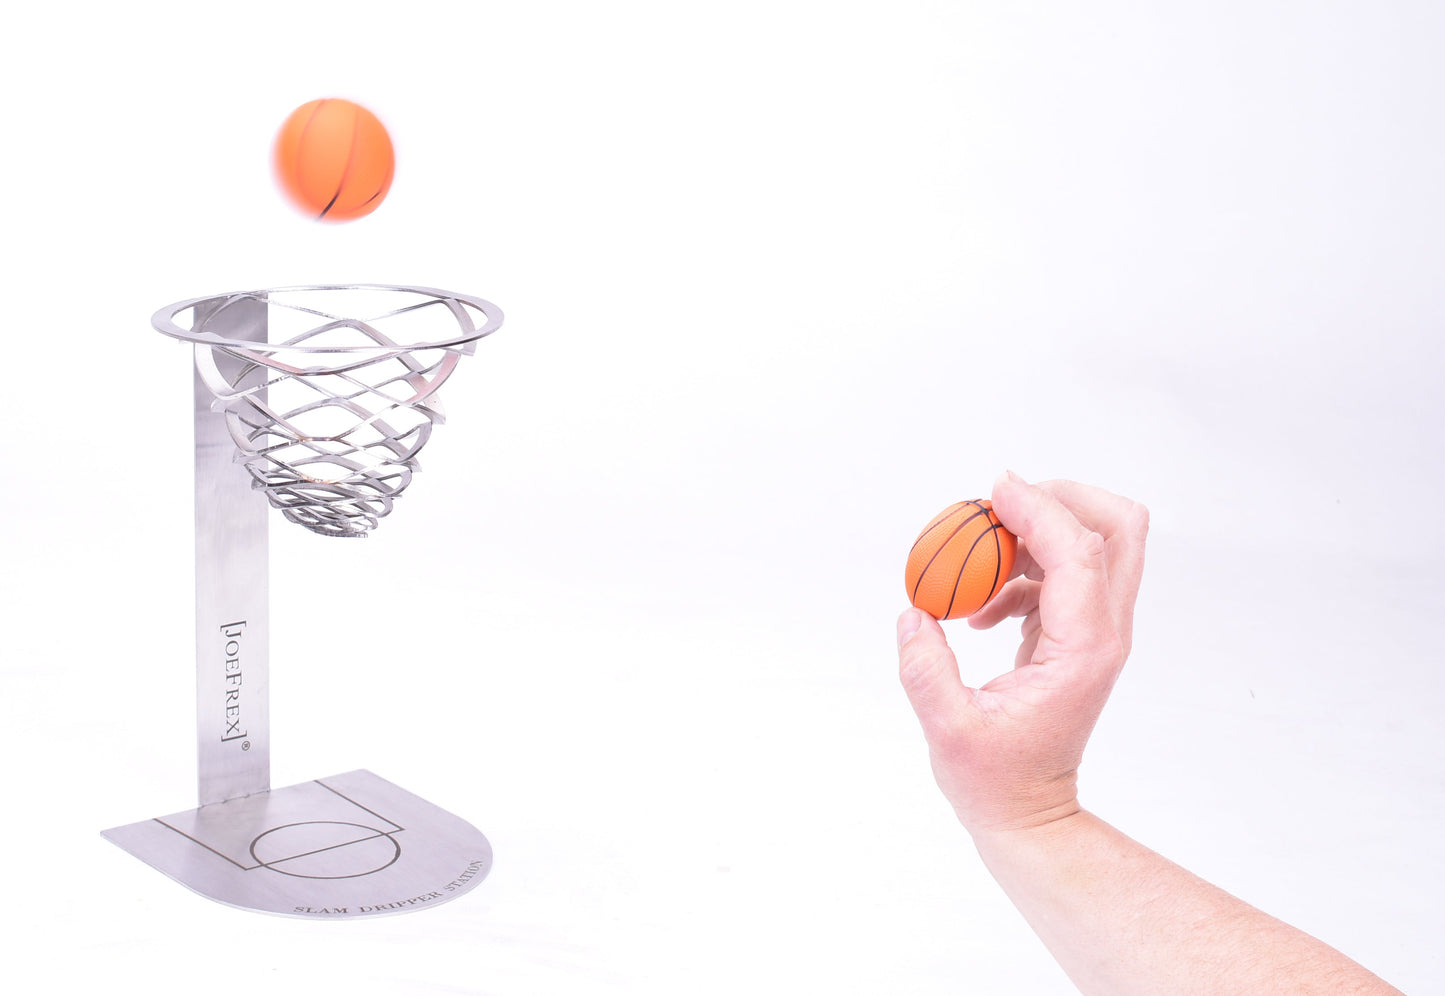 Coffee SLAM DRIPPER STATION also for Fans of Basketball